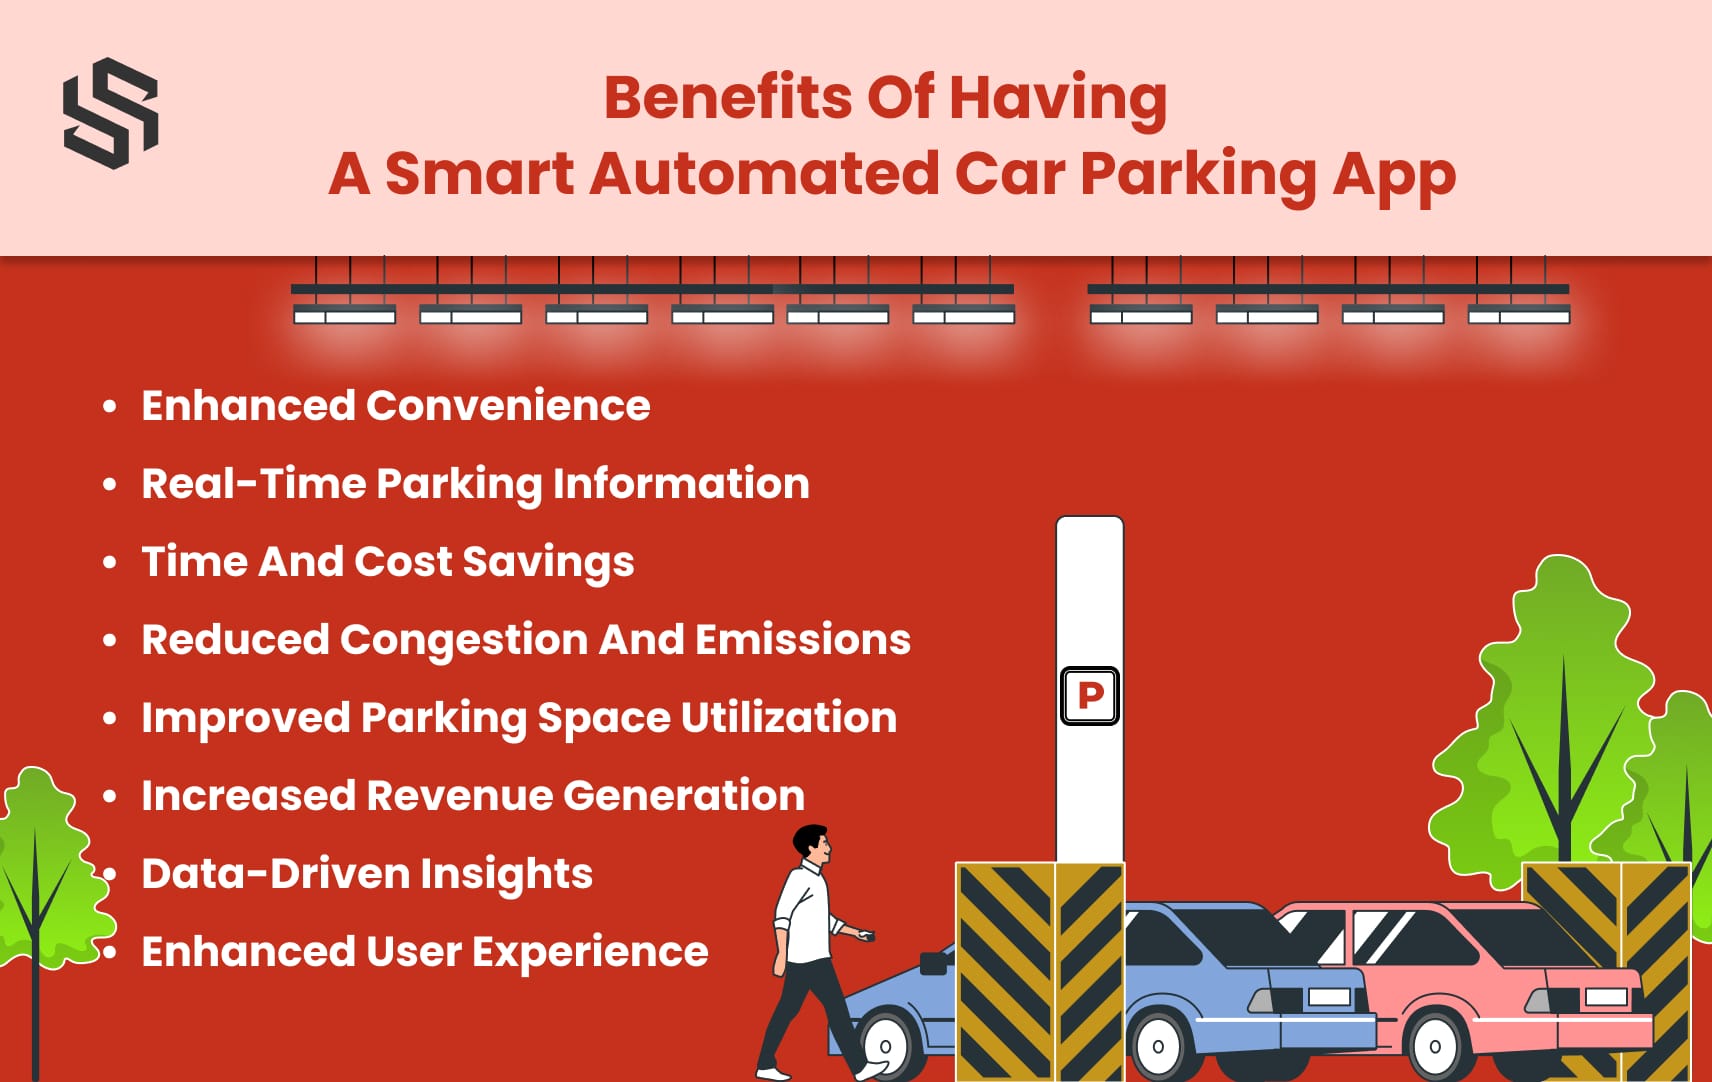 Benefits of having a smart automated car parking app